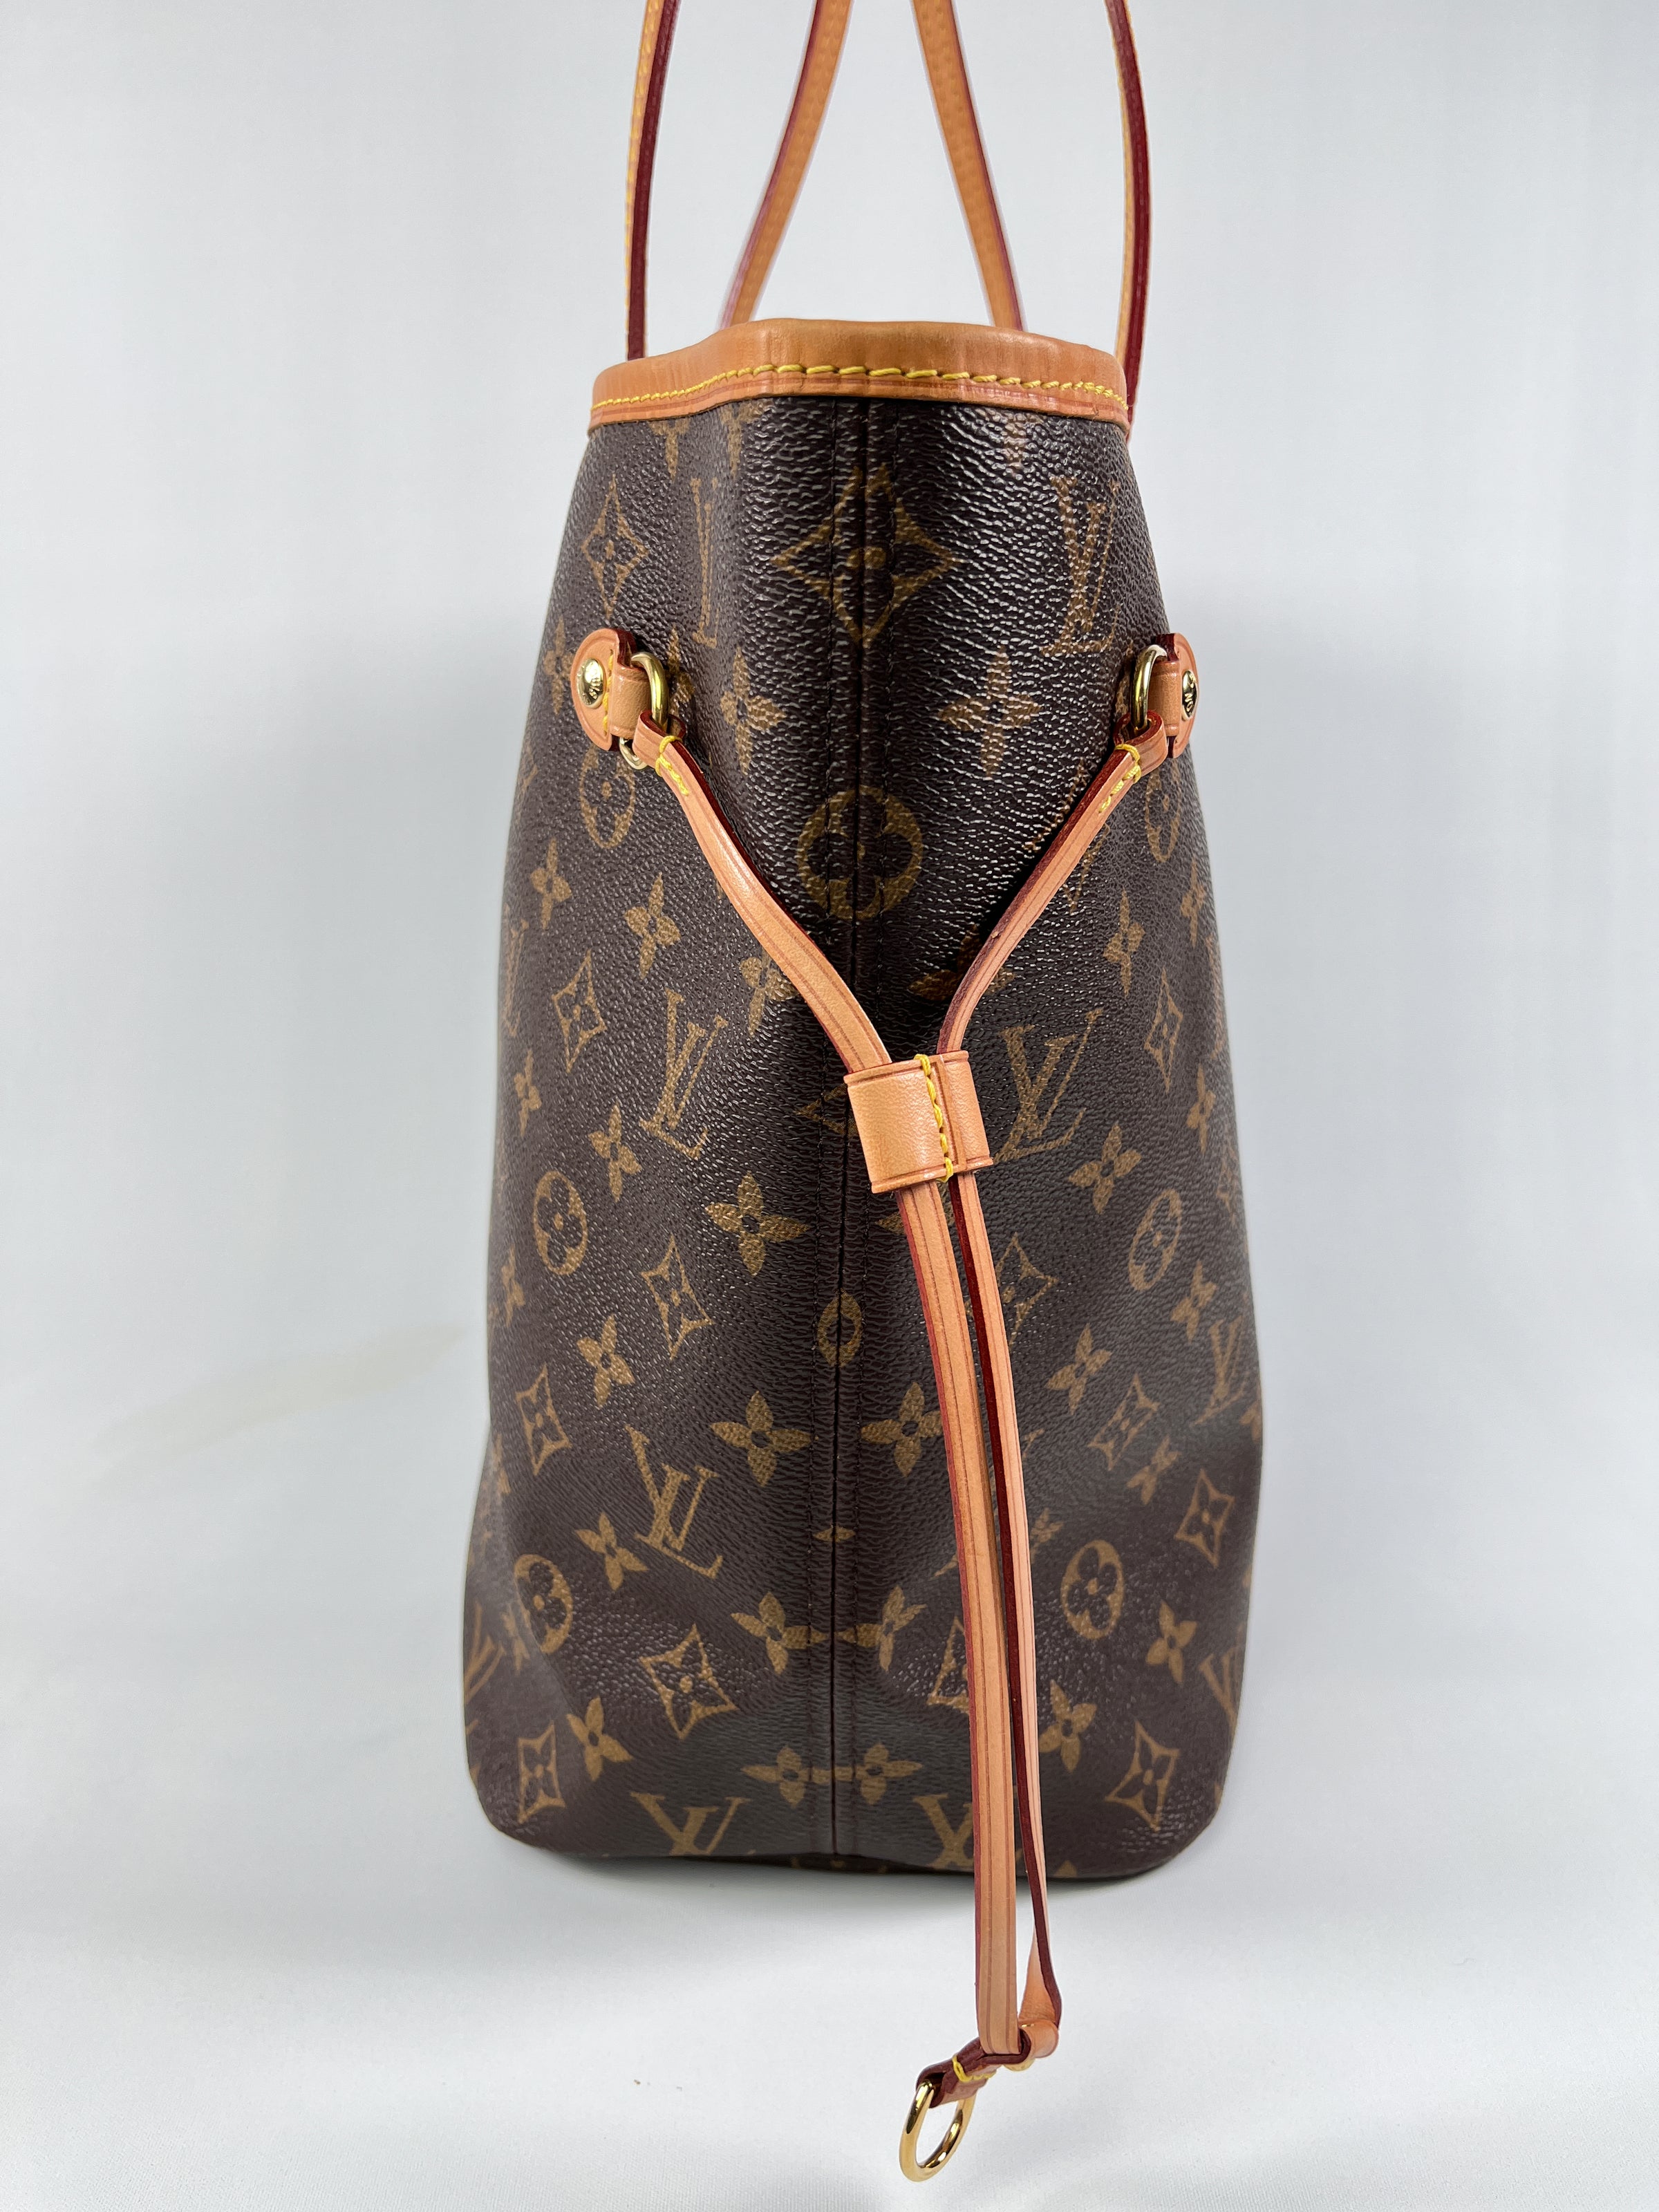 Louis Vuitton - Authenticated Neverfull Handbag - Leather Brown for Women, Very Good Condition